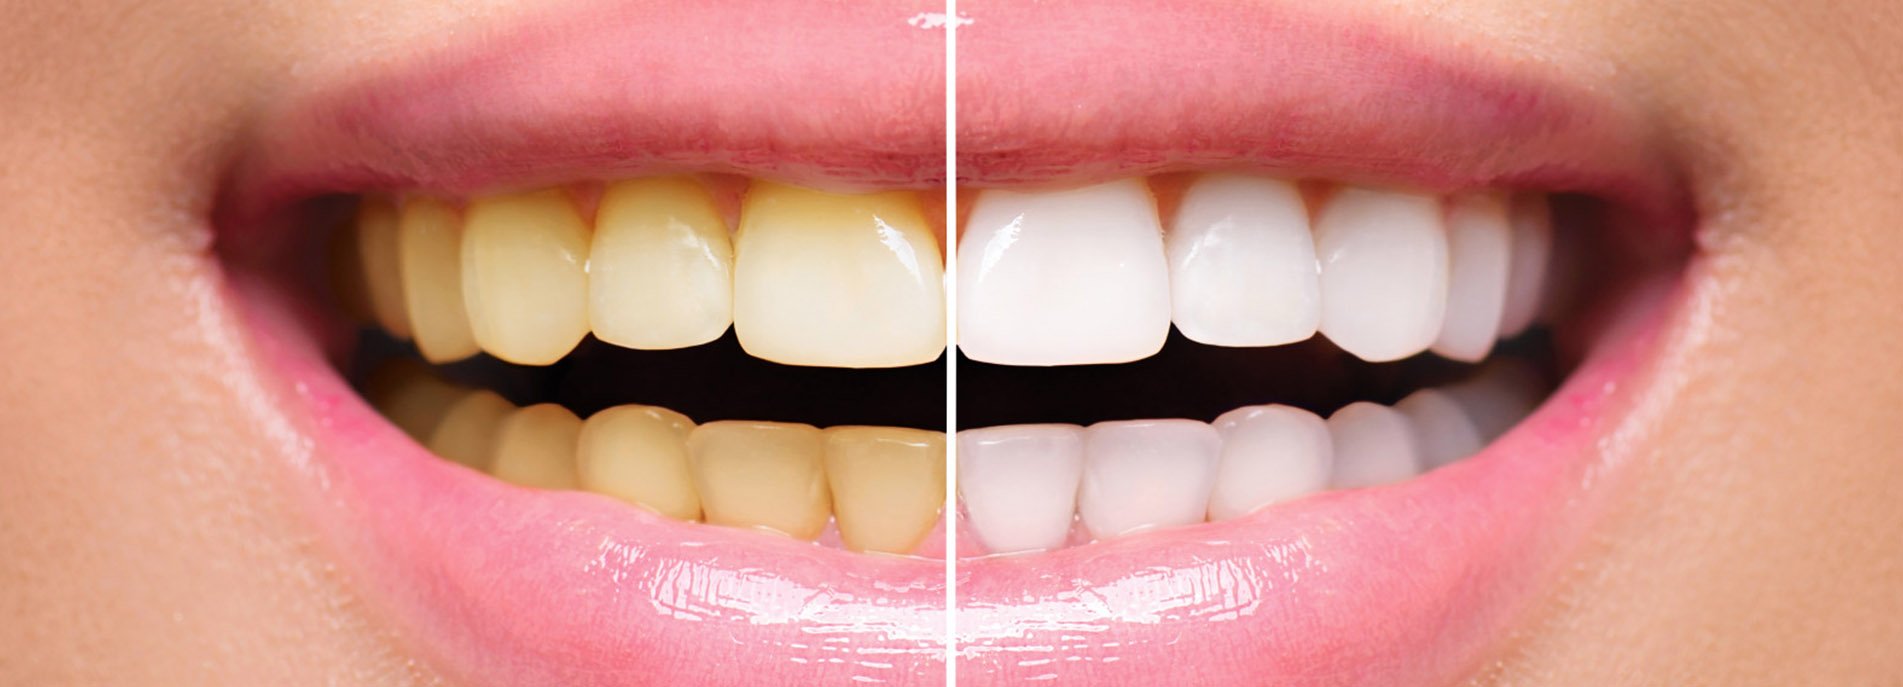 How to maintain healthy and white teeth